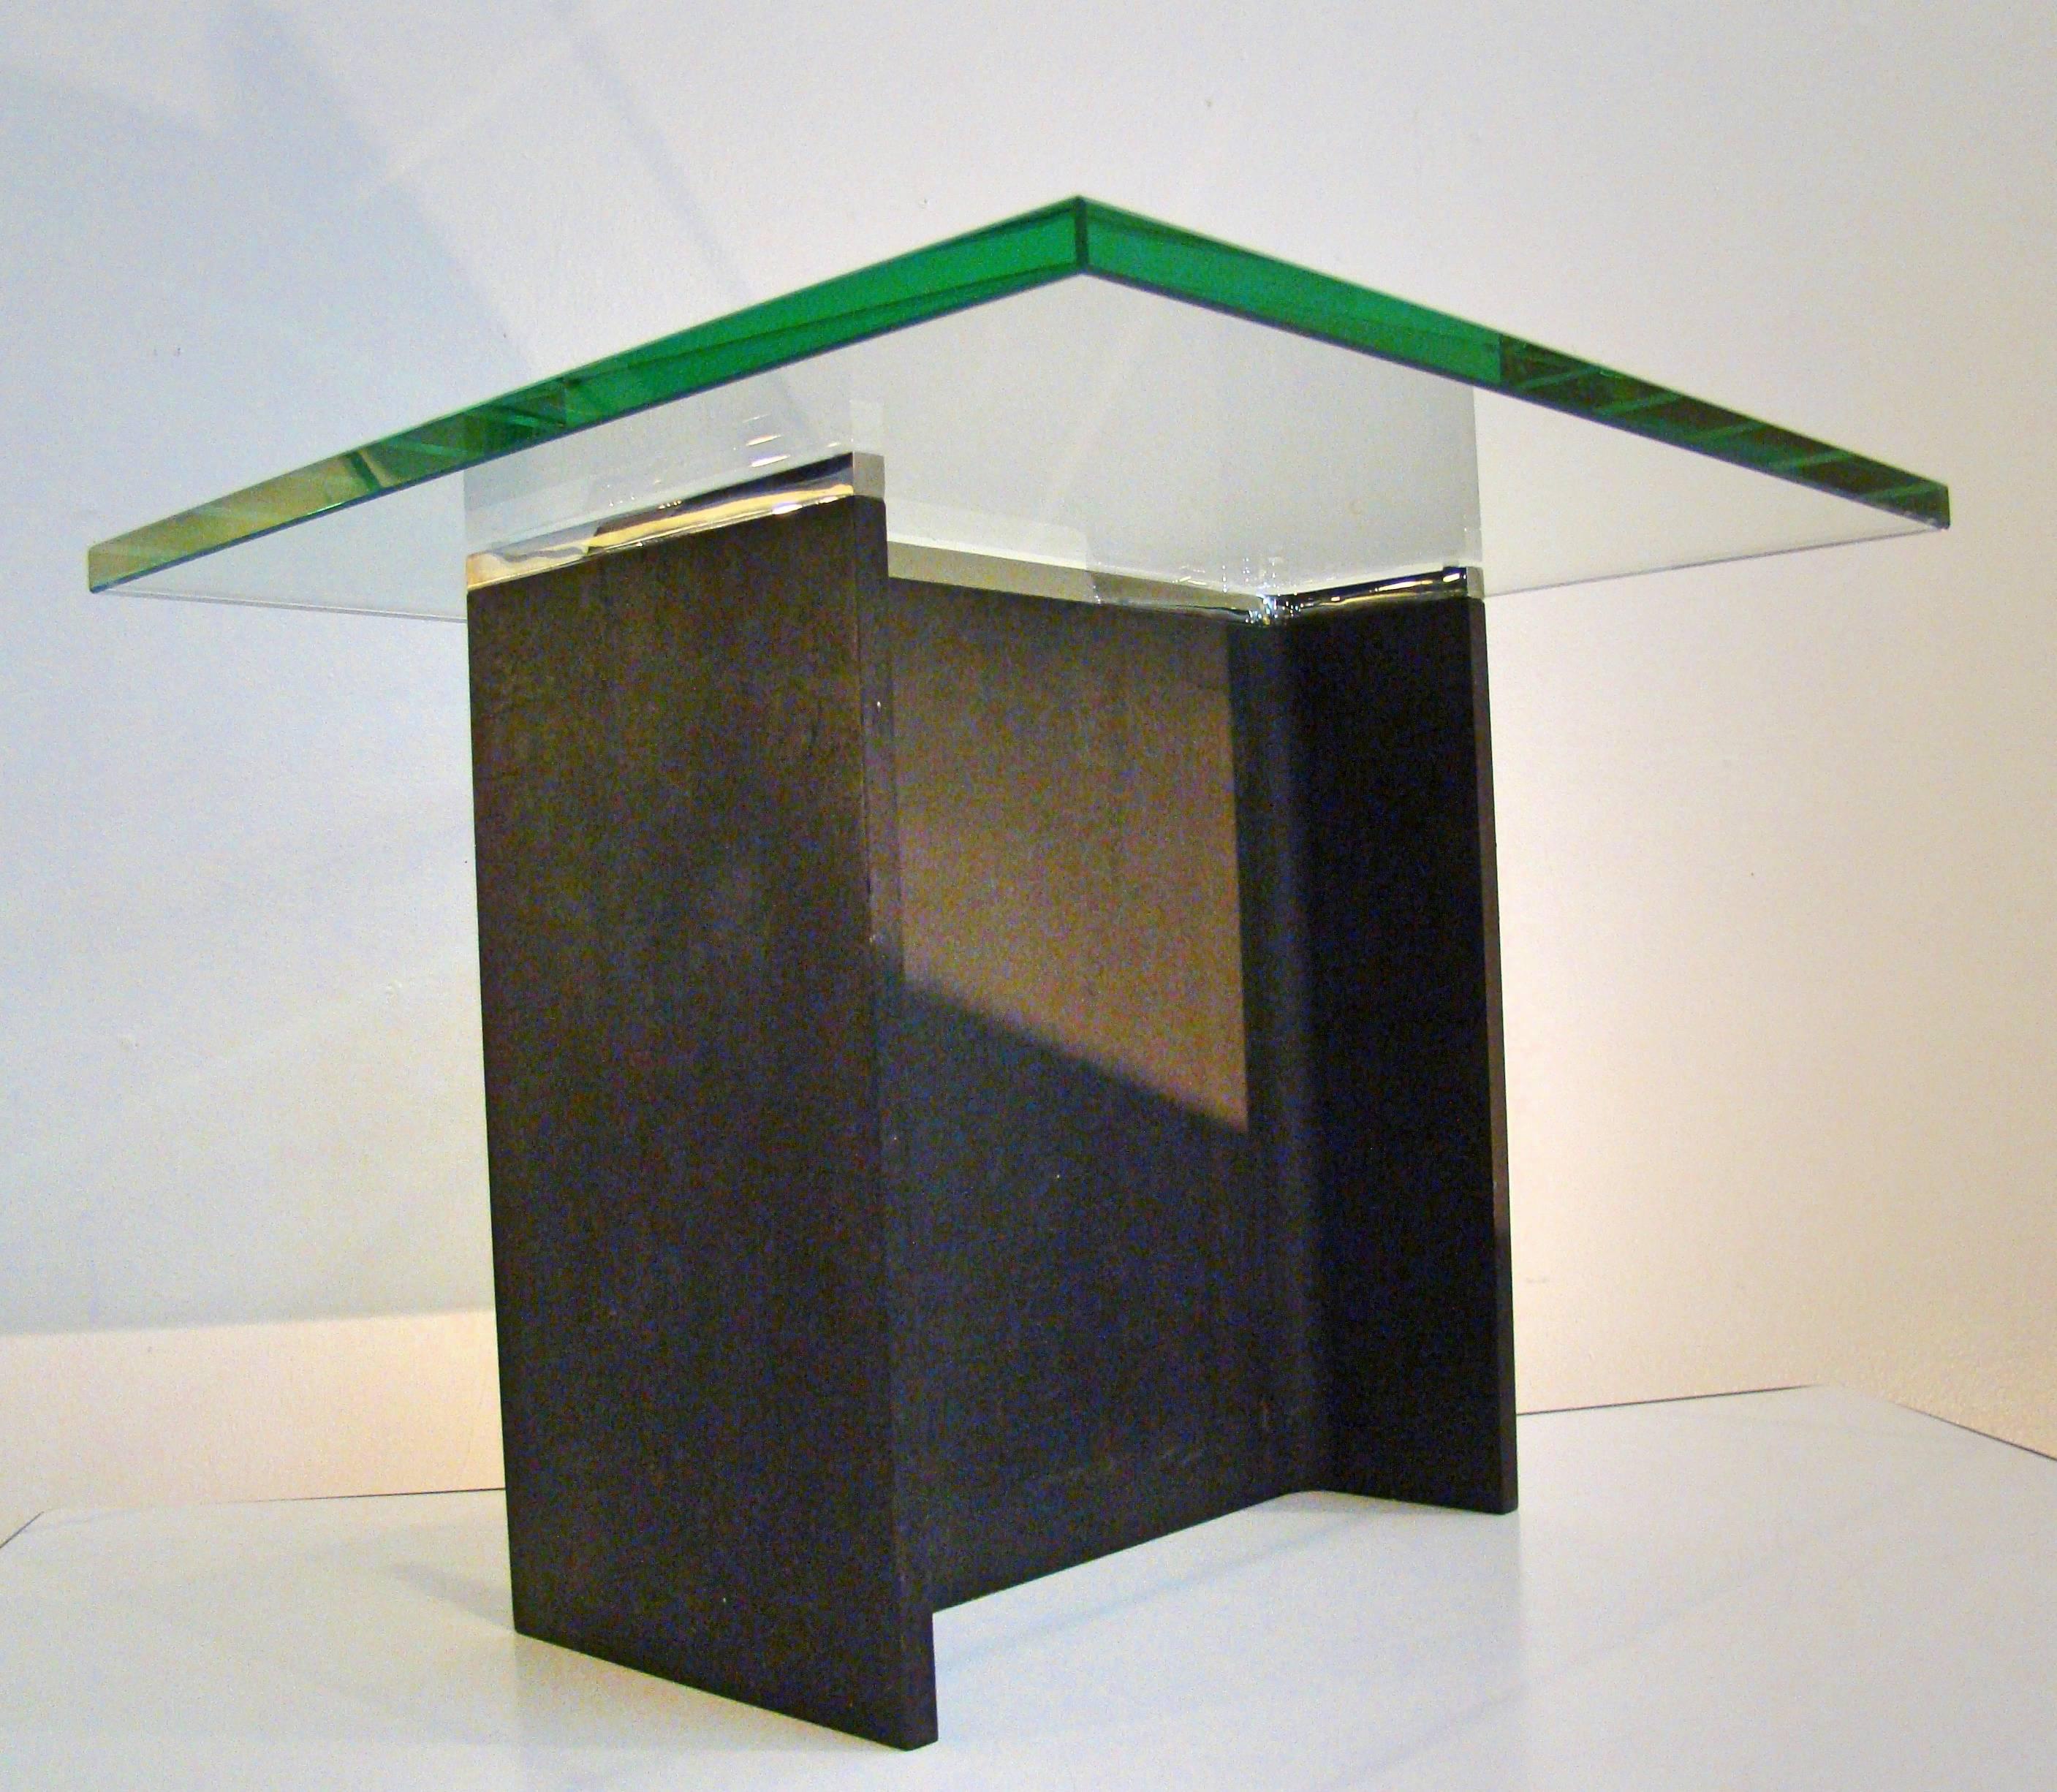 A rare James Prestini (1908-1993) structural steel I-beam 'table as sculpture' with  polished stainless steel finished 'edge trim' and original glass top. A beautiful and elegant piece. Examples of his works are on permanent display in MoMA, the